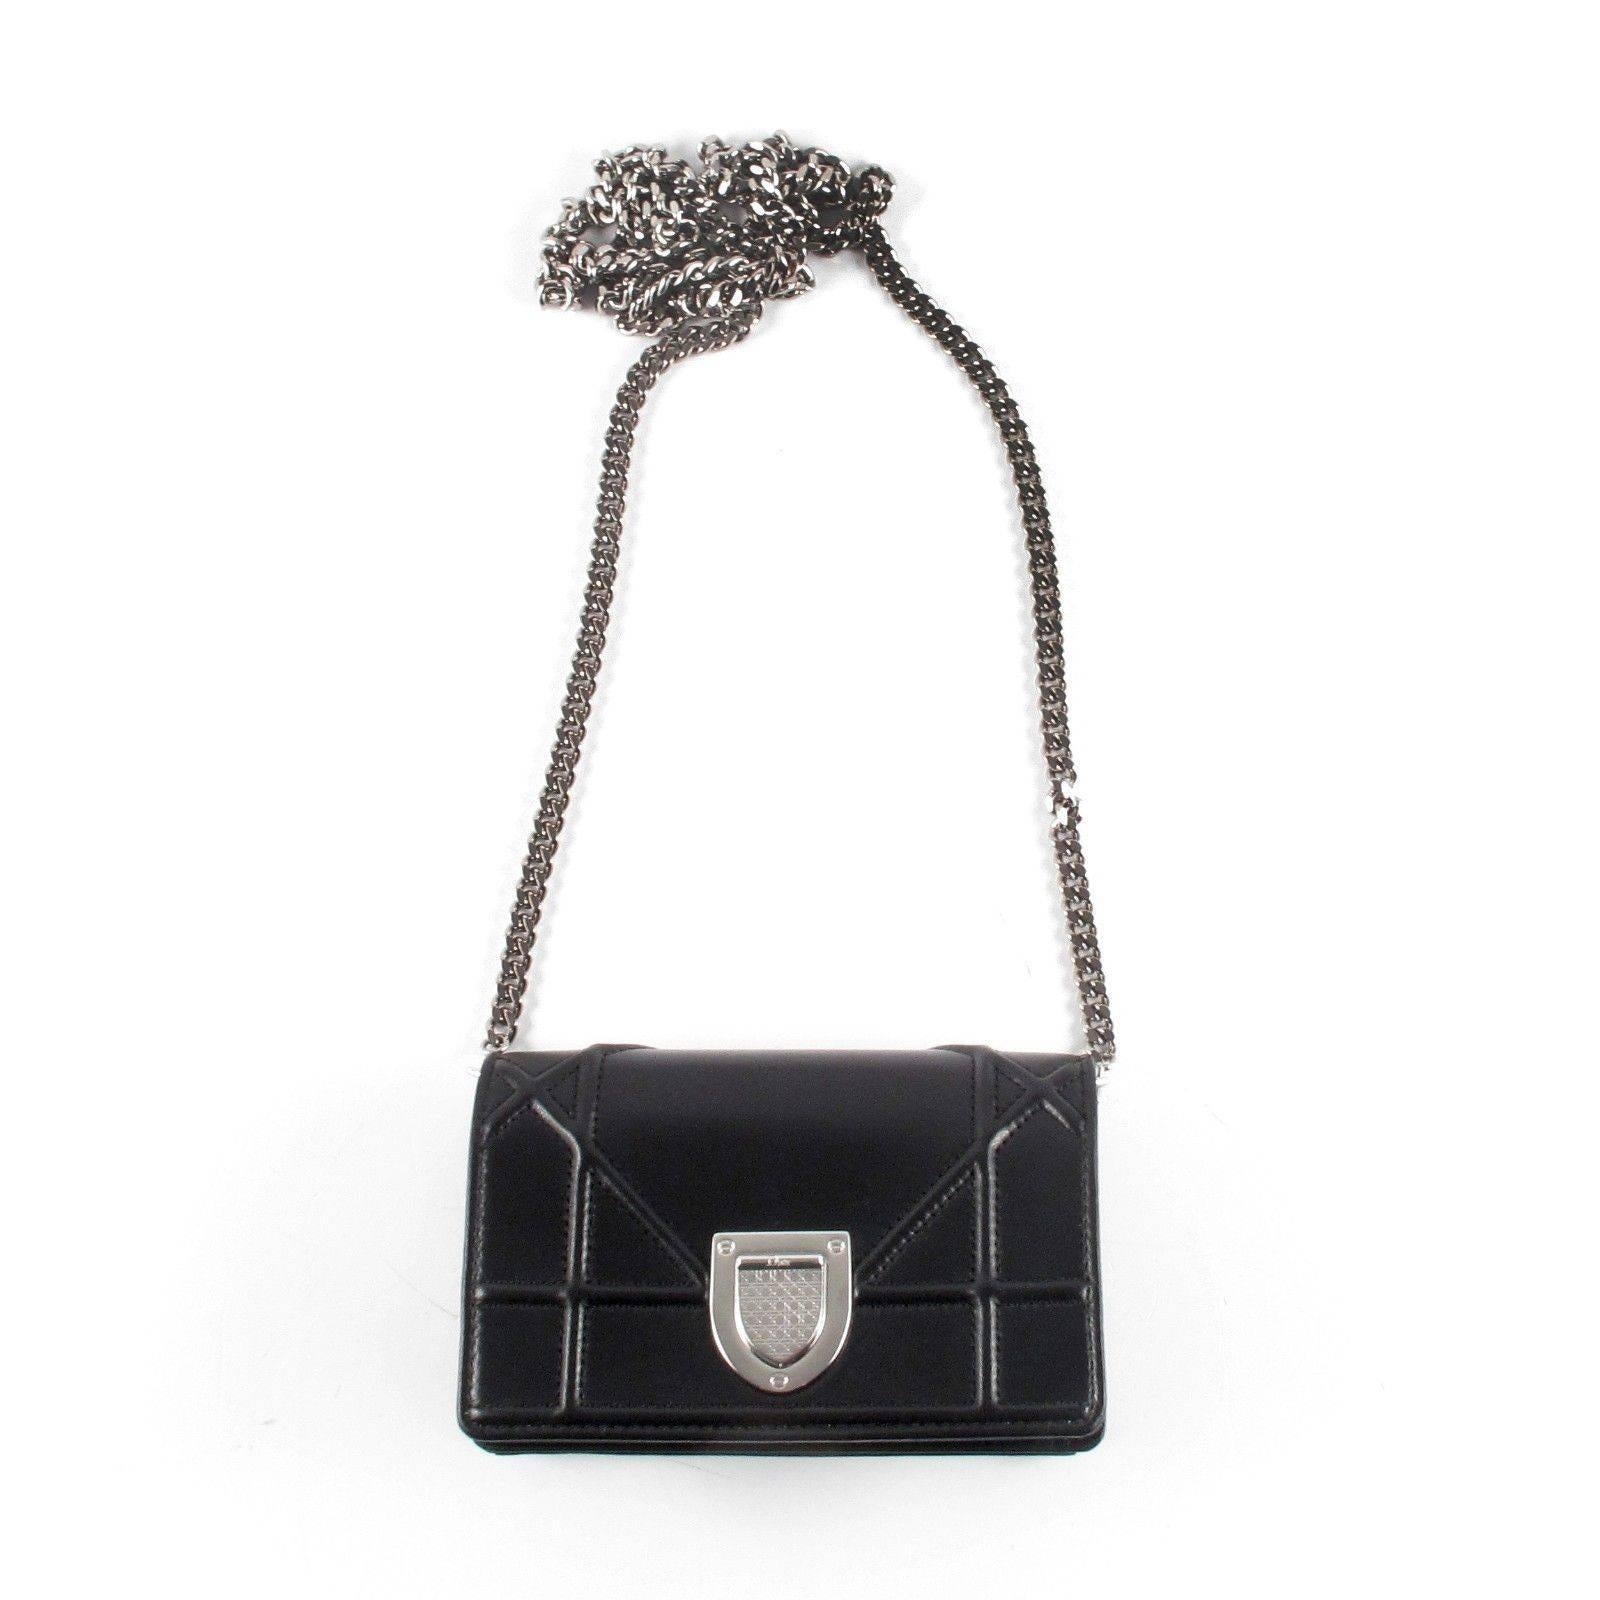 Dior - Diorama Mini Crossbody Bag

can also be worn as a clutch!

Color: Black

Material: Leather

------------------------------------------------------------

Details:

- detachable shoulder strap

- silver tone hardware

- push